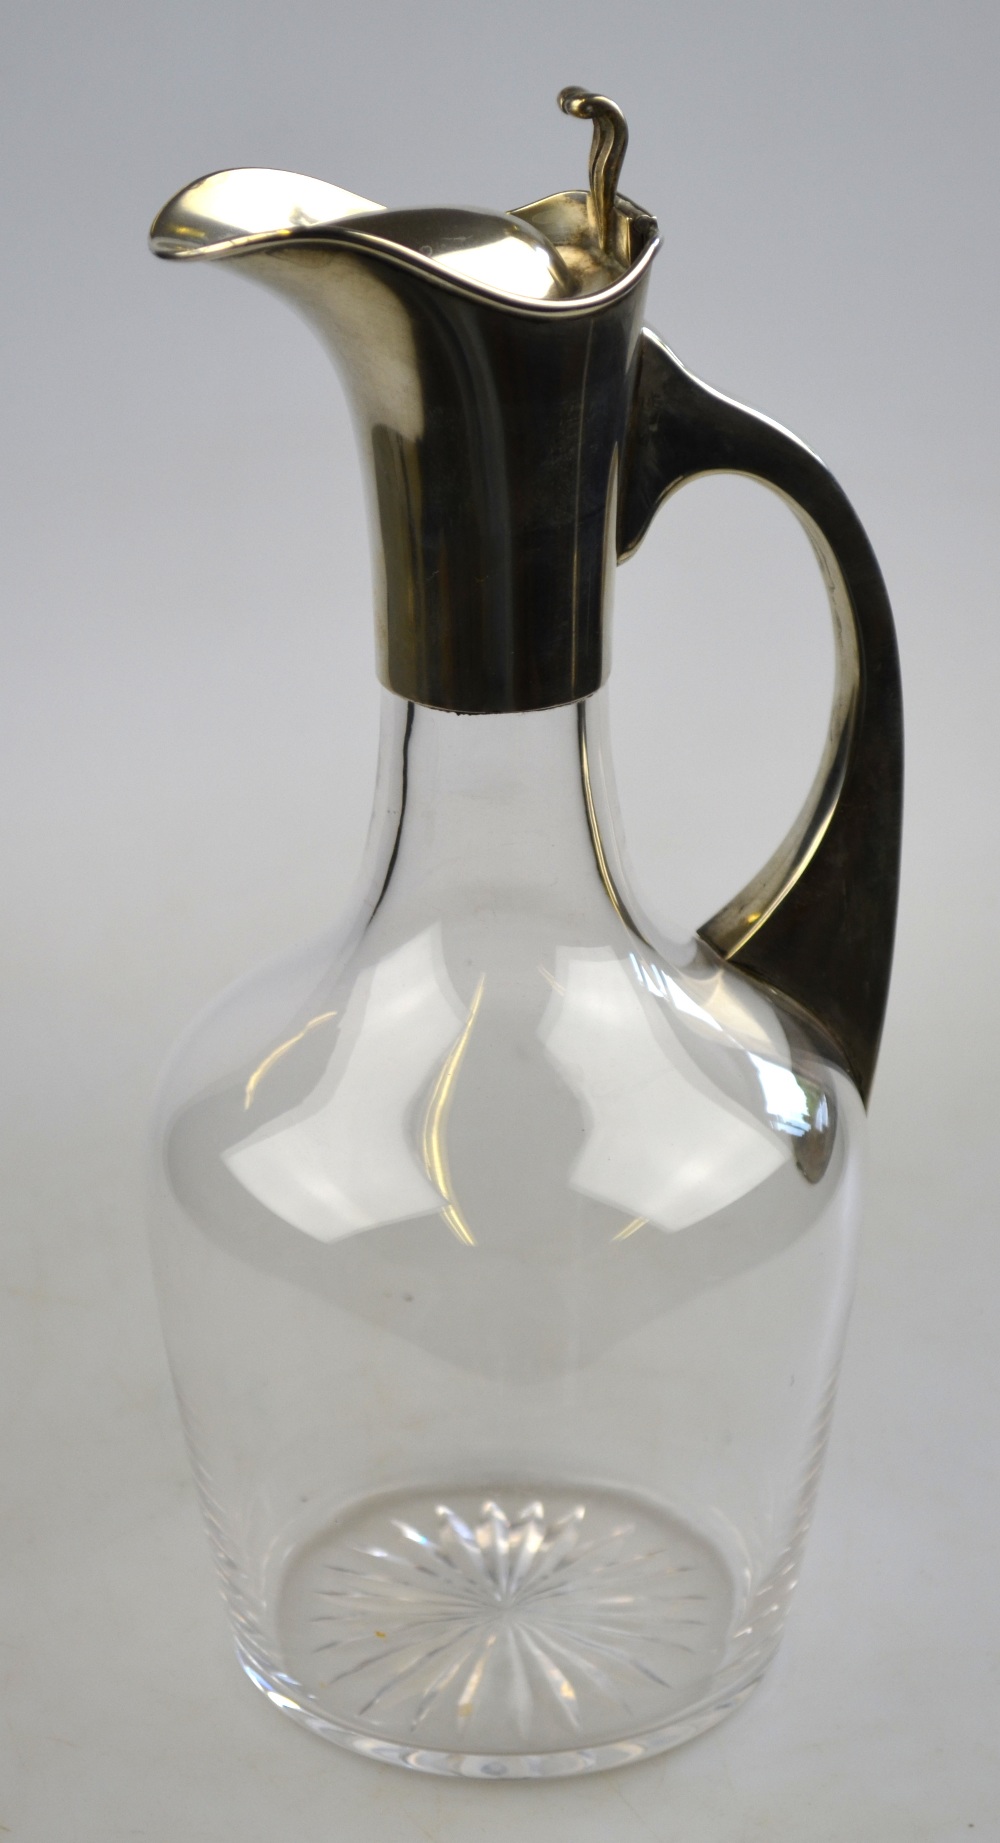 An Edwardian glass claret jug with star-cut base and silver collar, handle and hinged cover, J.